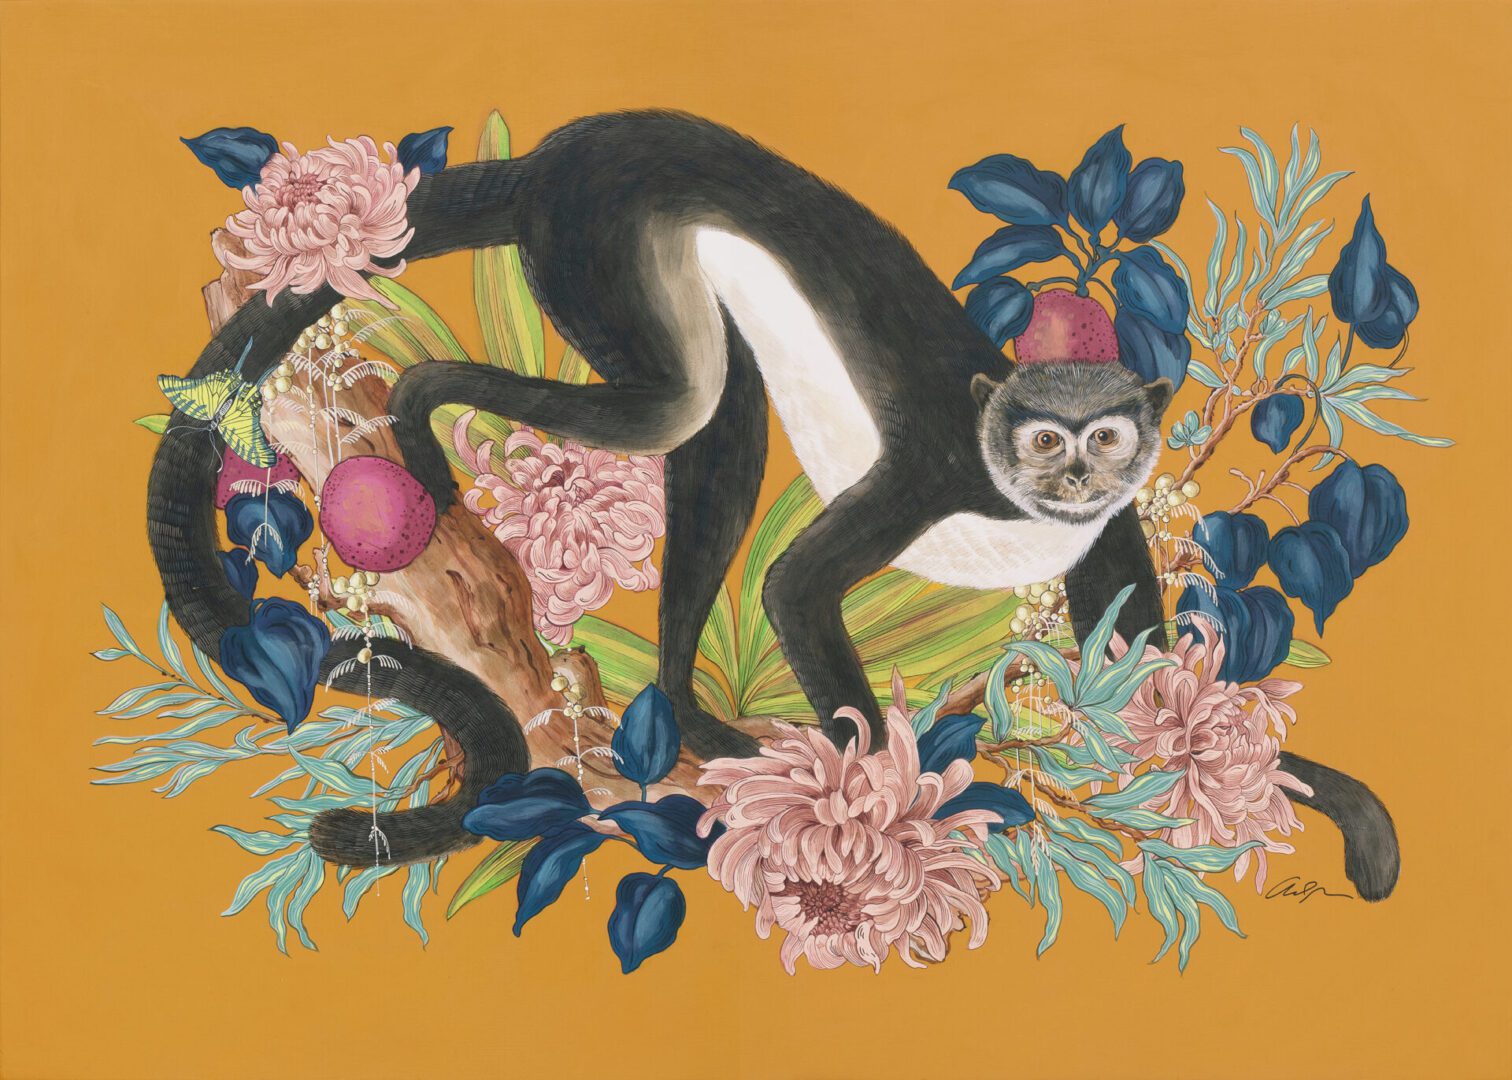 "Monkey Business" Modern Chinoiserie chic Art, Monkey Painting by Allison Cosmos